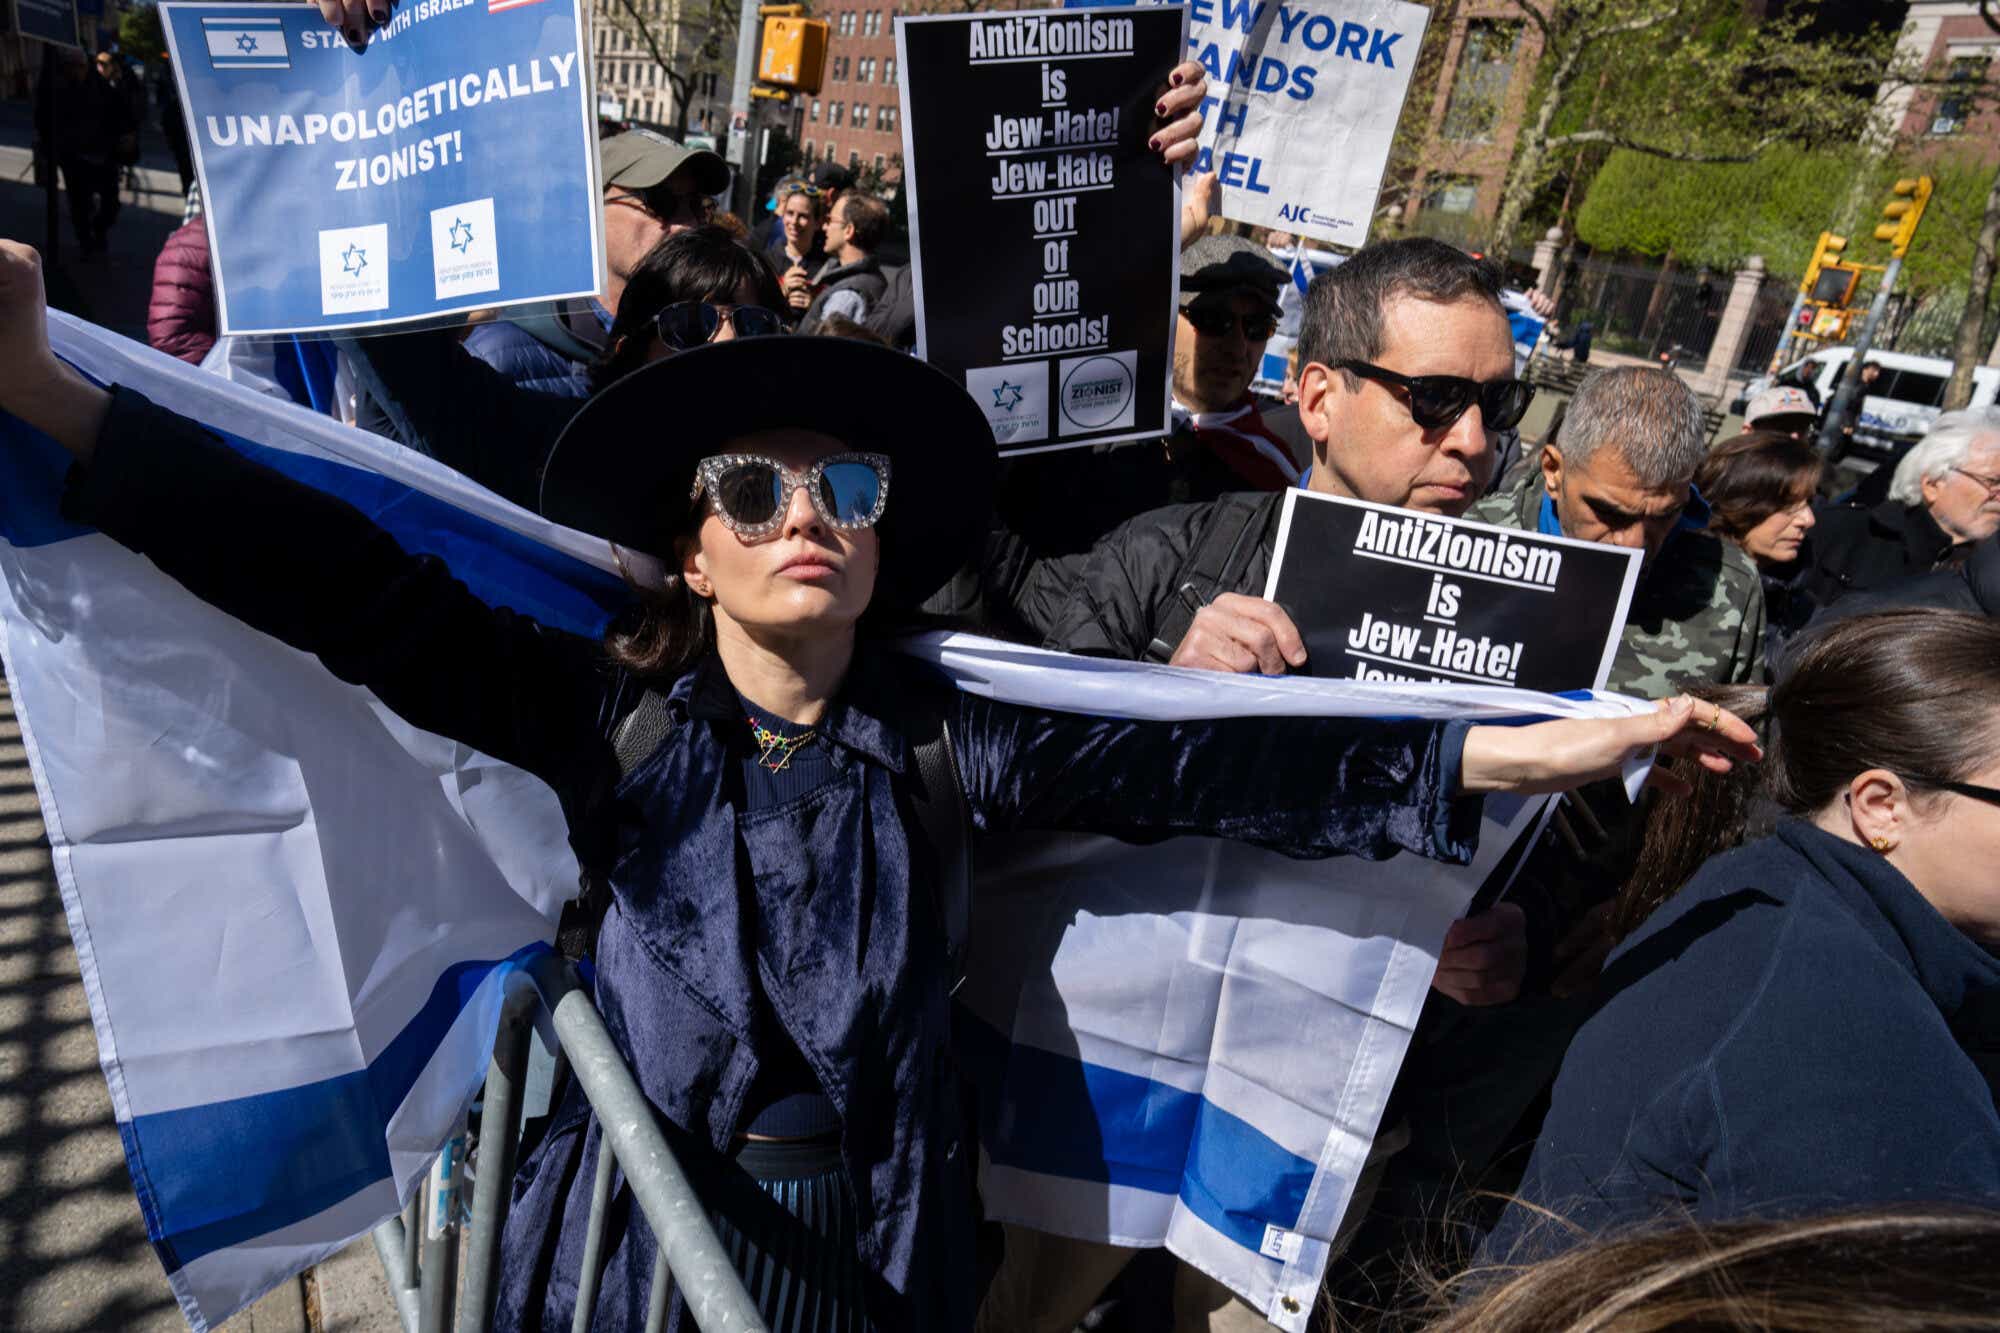 People attend a pro-Israeili rally held by Assistant Professor Shai Davidai at Columbia University on April 22, 2024 in New York City.